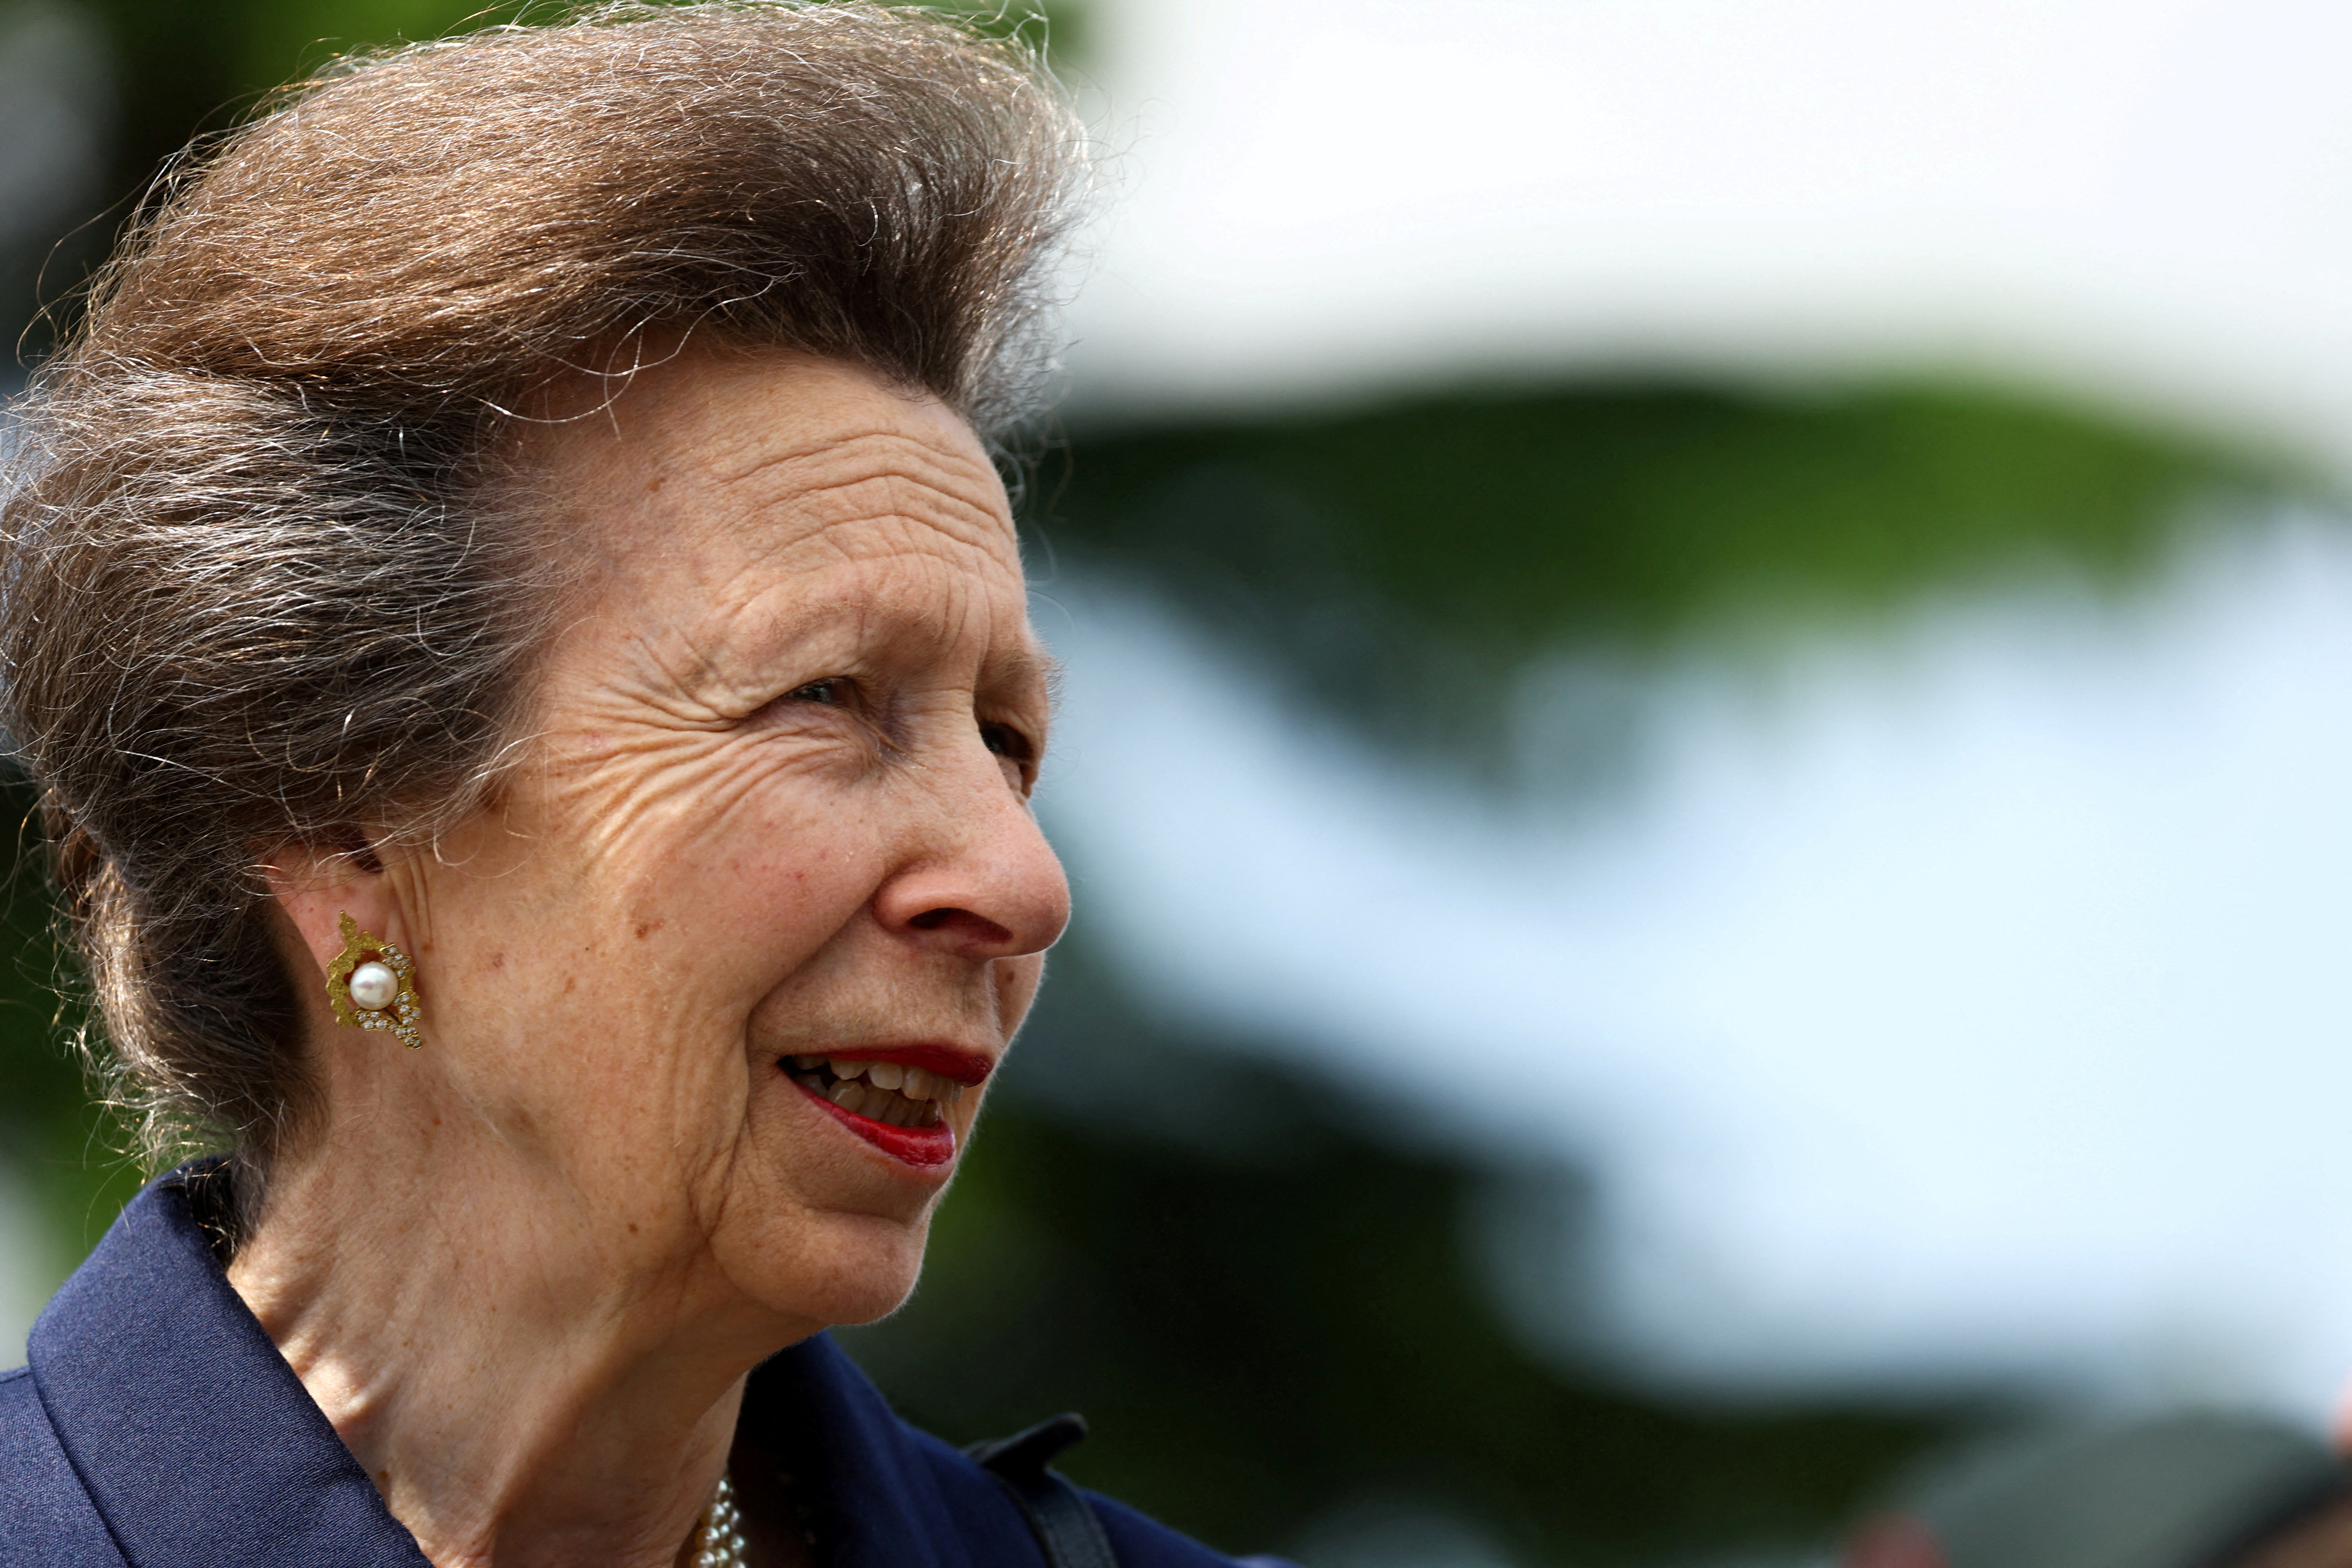 Britain's Princess Royal Anne attends a commemorative event for the 80th anniversary of D-Day, in Normandy